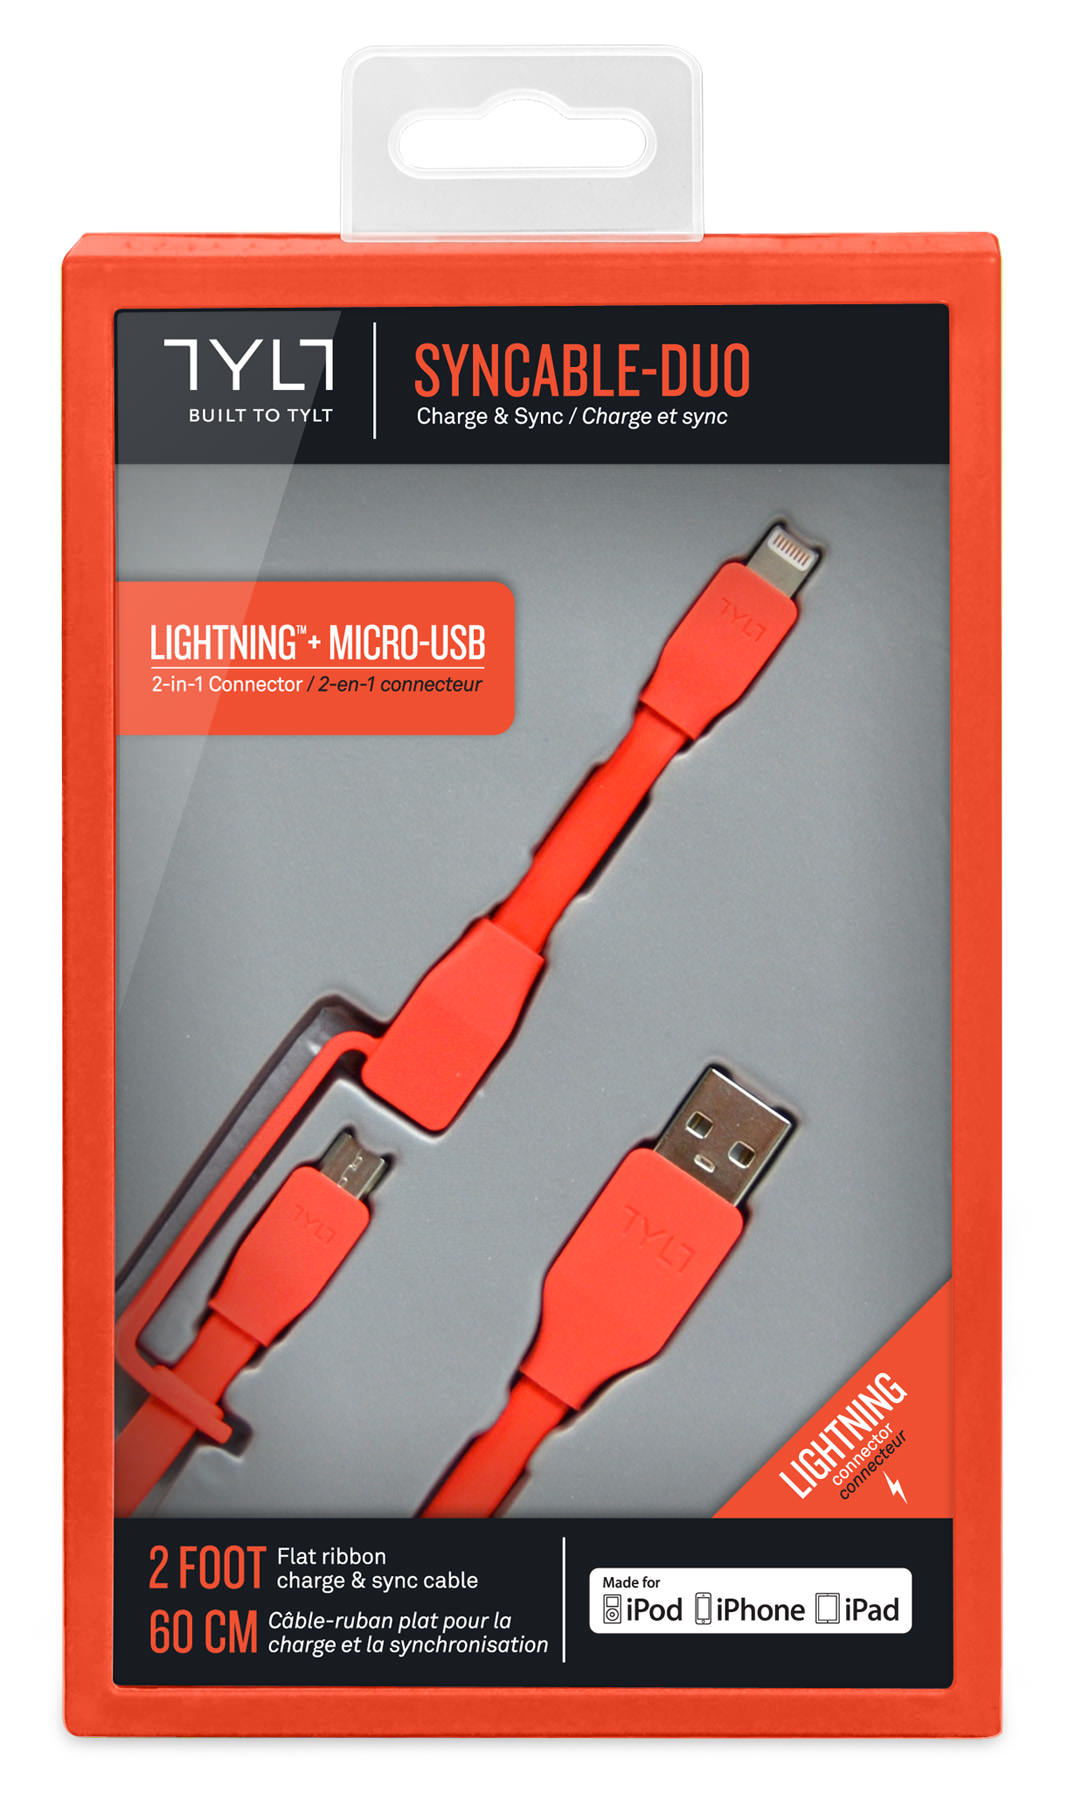 TYLT SYNCABLE DUO 05